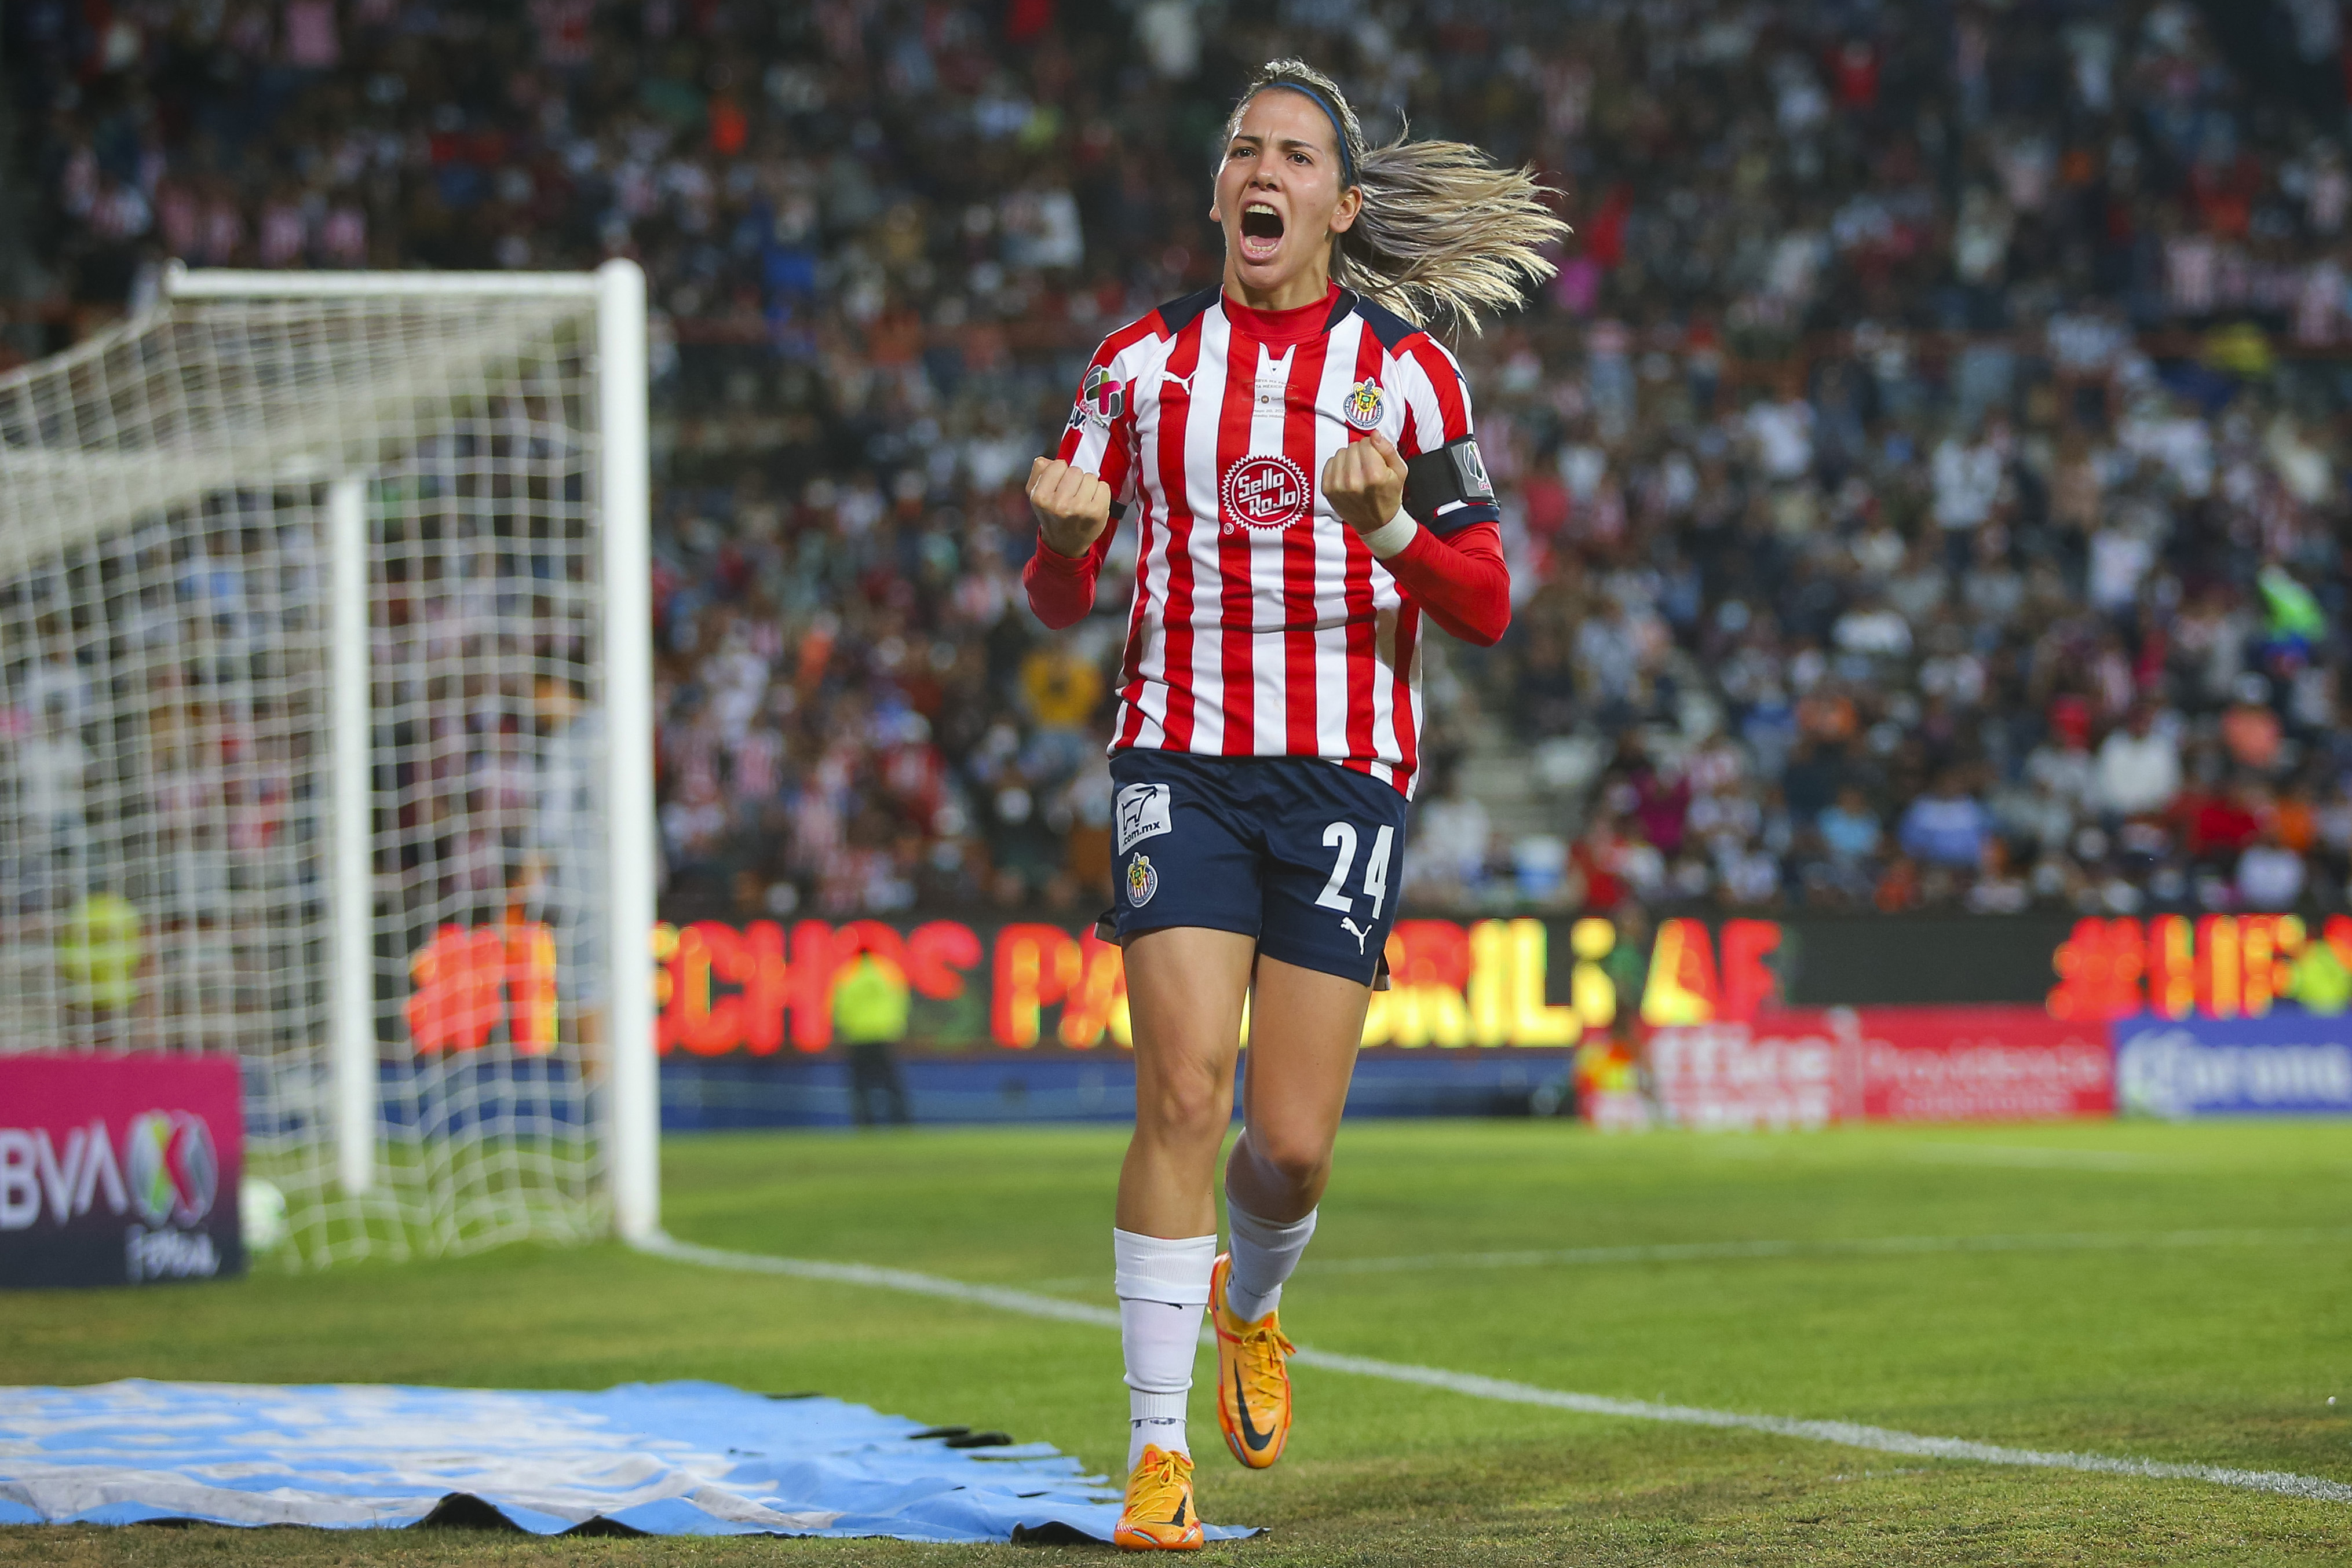 Alicia Cervantes of Chivas celebrates after scoring her team’s third goal during the final first leg match between Pachuca and Chivas as part of the Torneo Grita Mexico C22 Liga MX Femenil at Hidalgo Stadium on May 20, 2022 in Pachuca, Mexico.